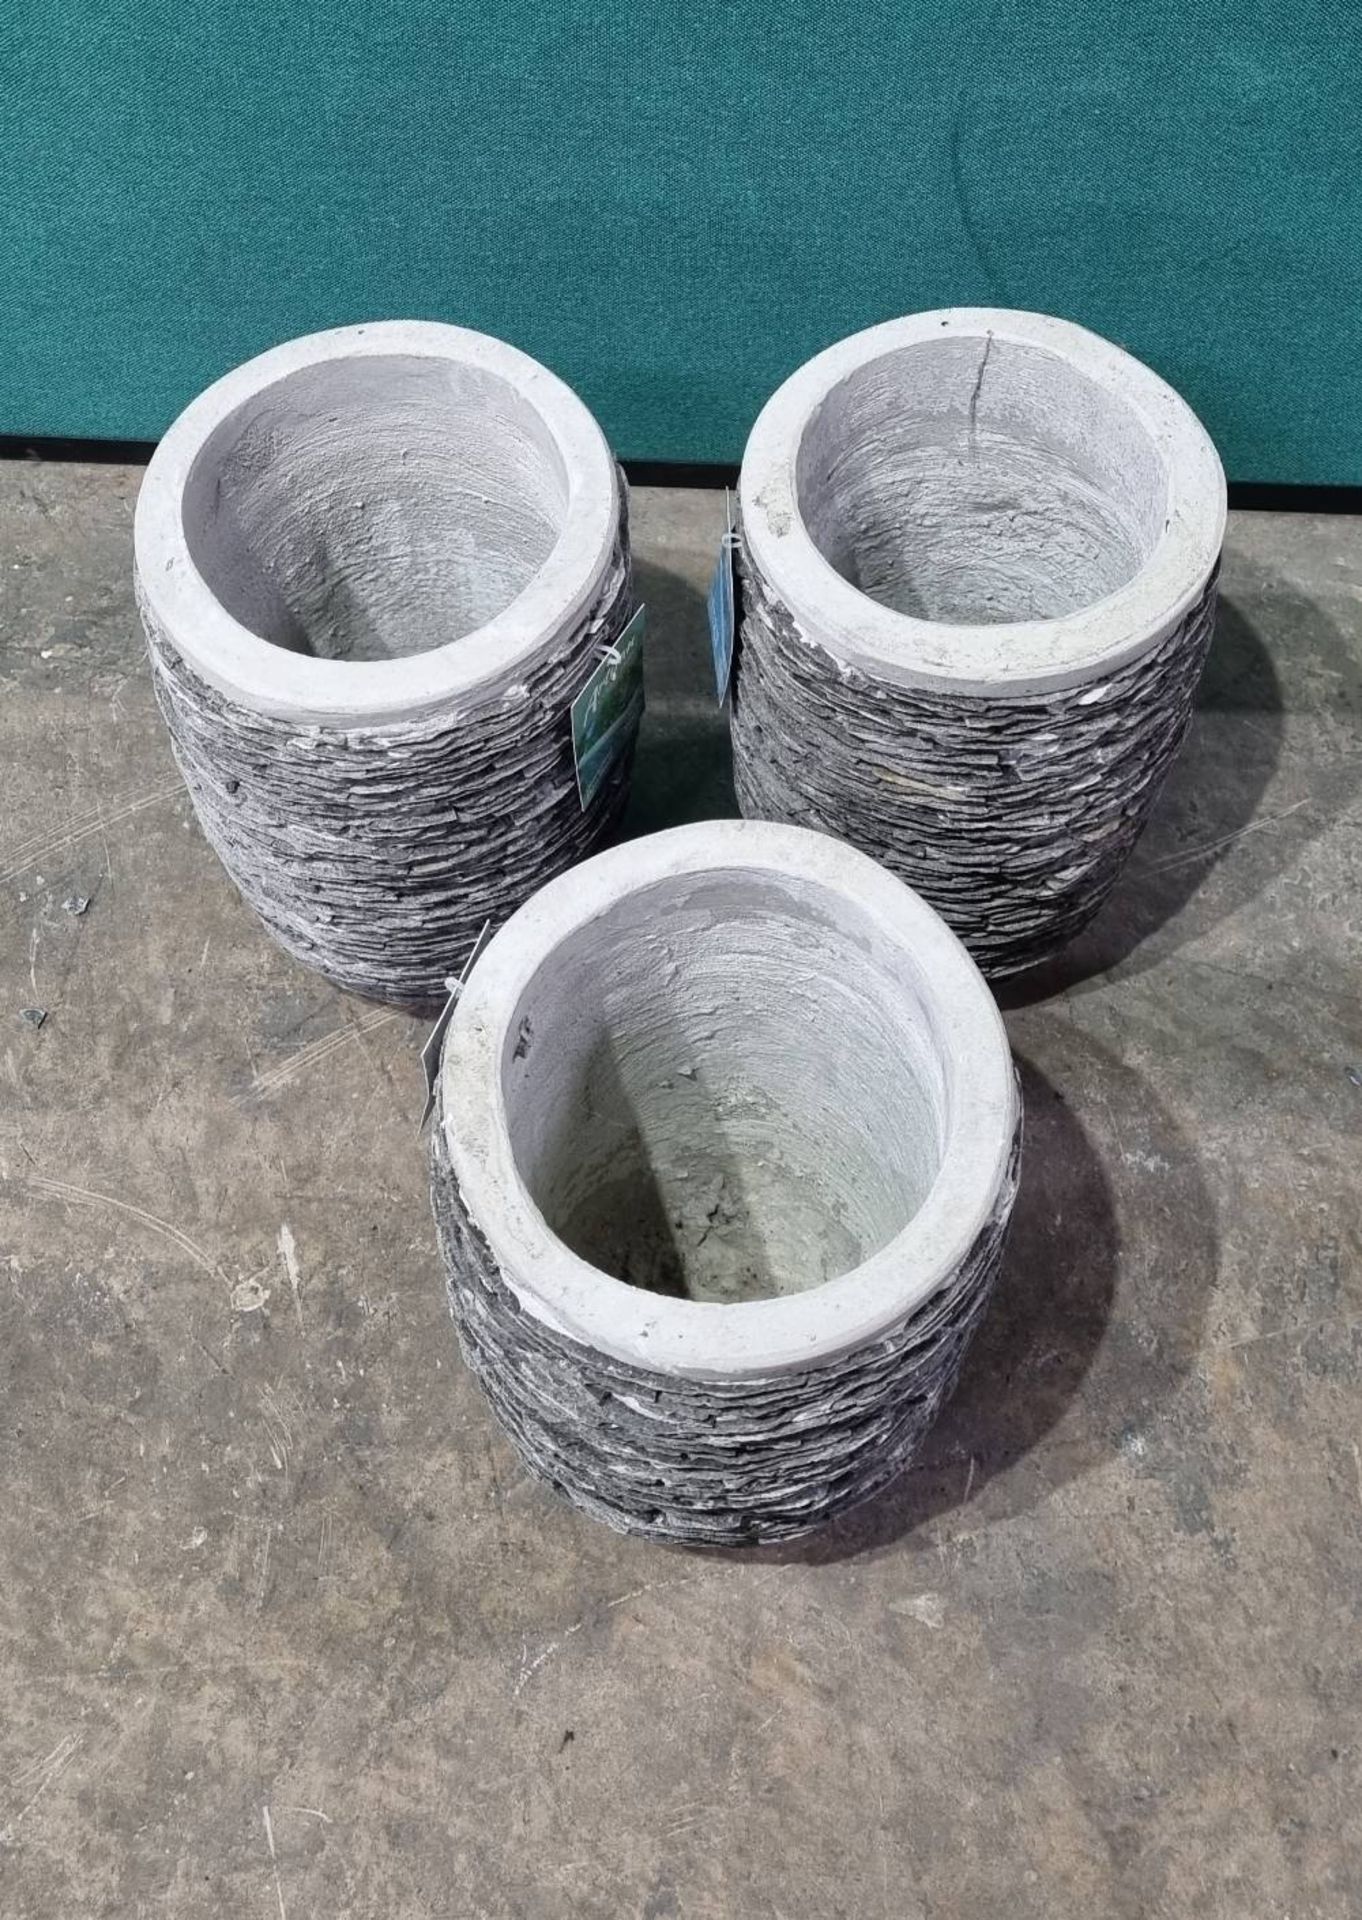 3 x Mims Artisan Collection Westcott BEA 40294-S2 Tall Slate Egg Planters | 365mm x 220mm | RRP £29. - Image 2 of 4